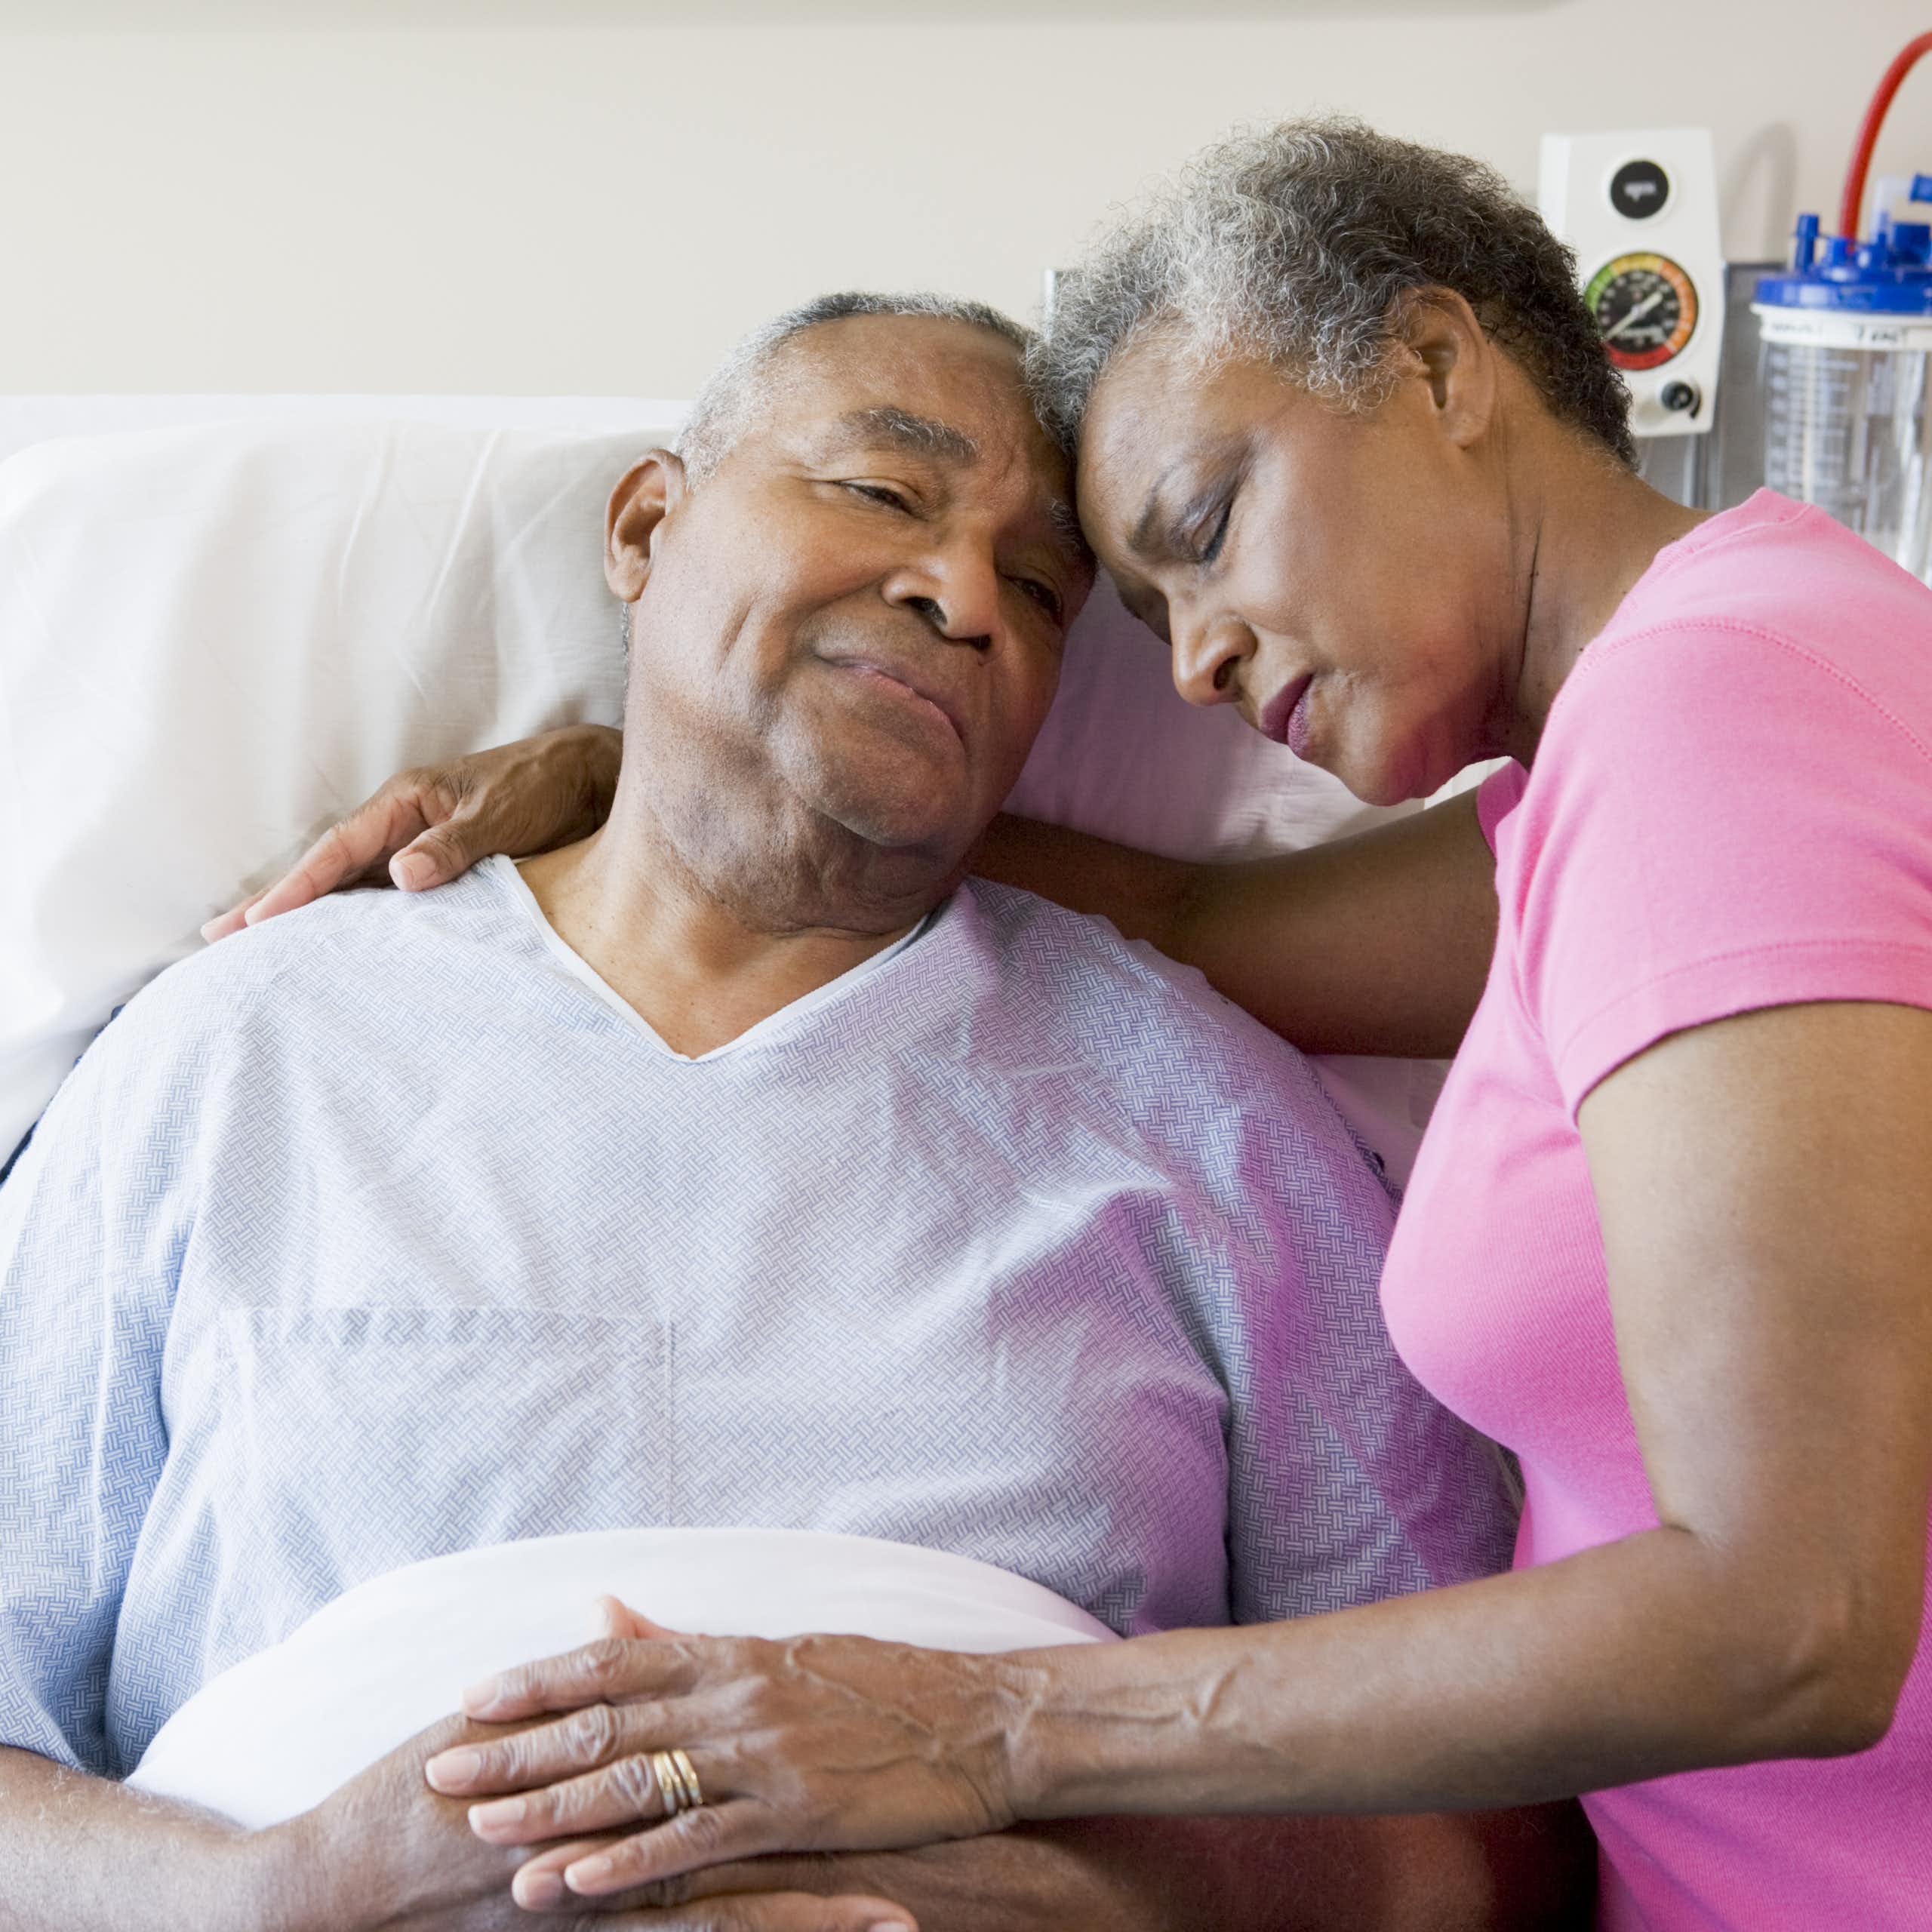 An older man in hospital bed and a woman with her arm around him